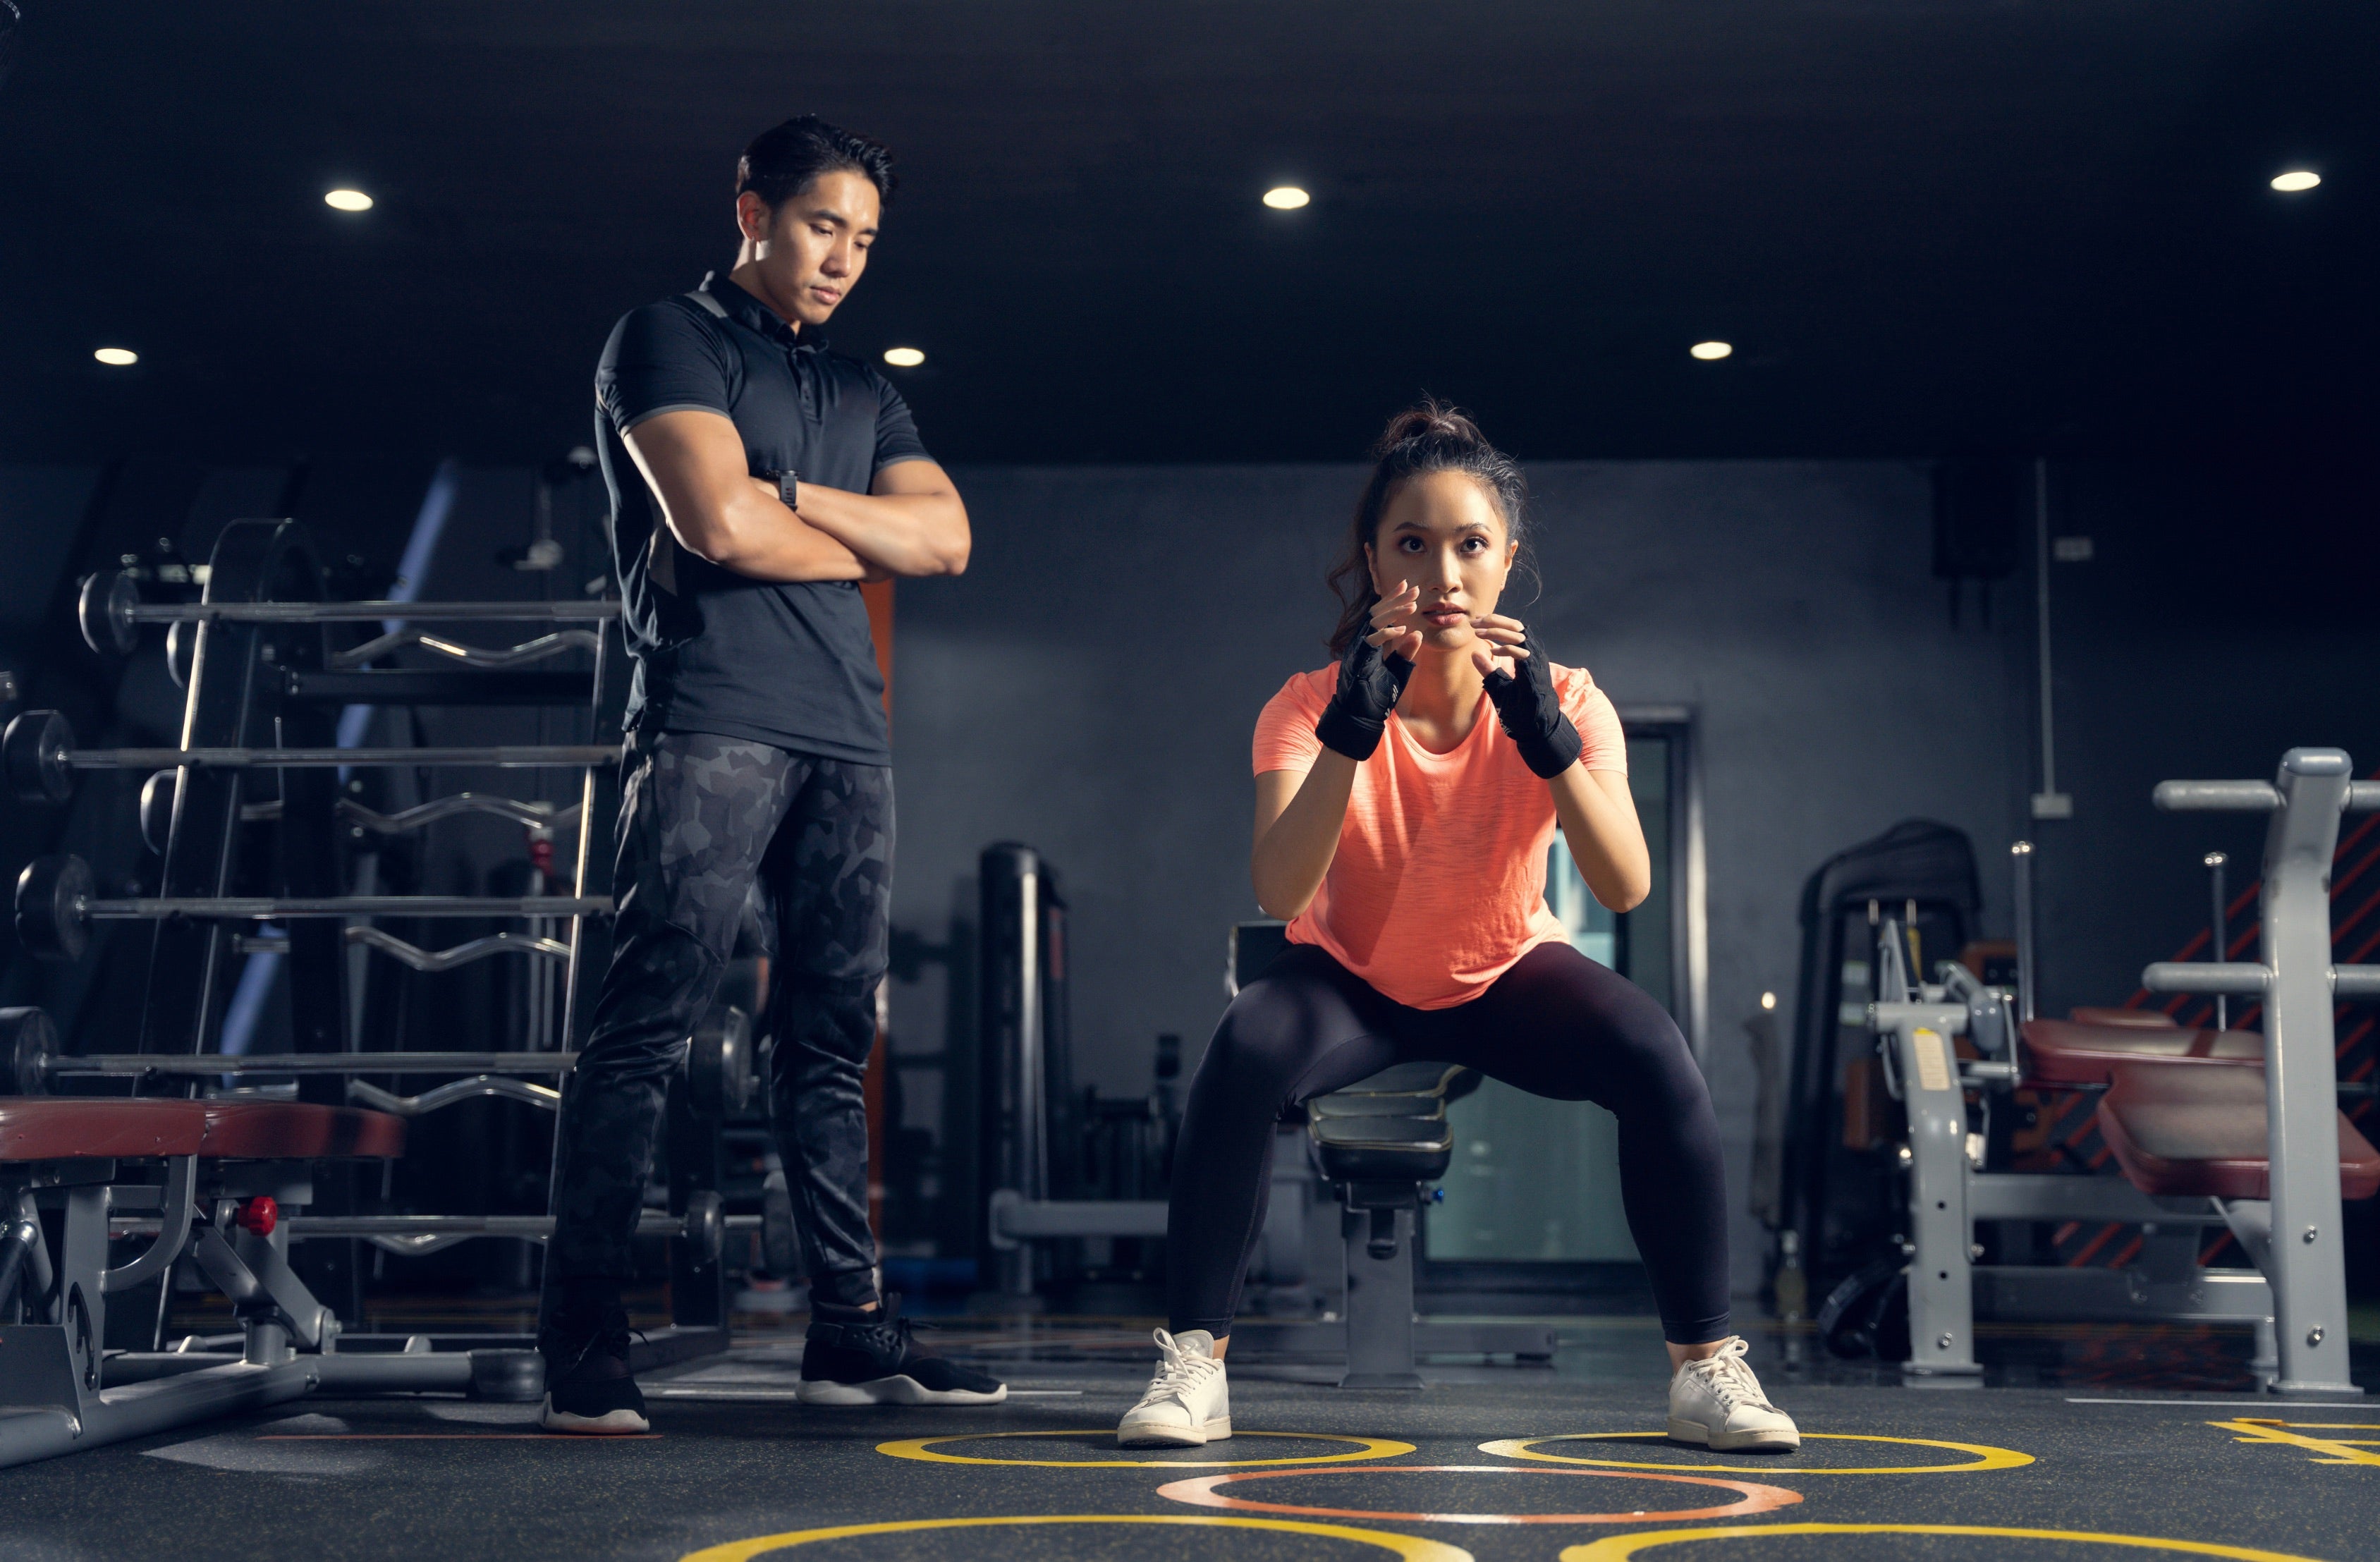 A personal trainer is providing cheap personal training